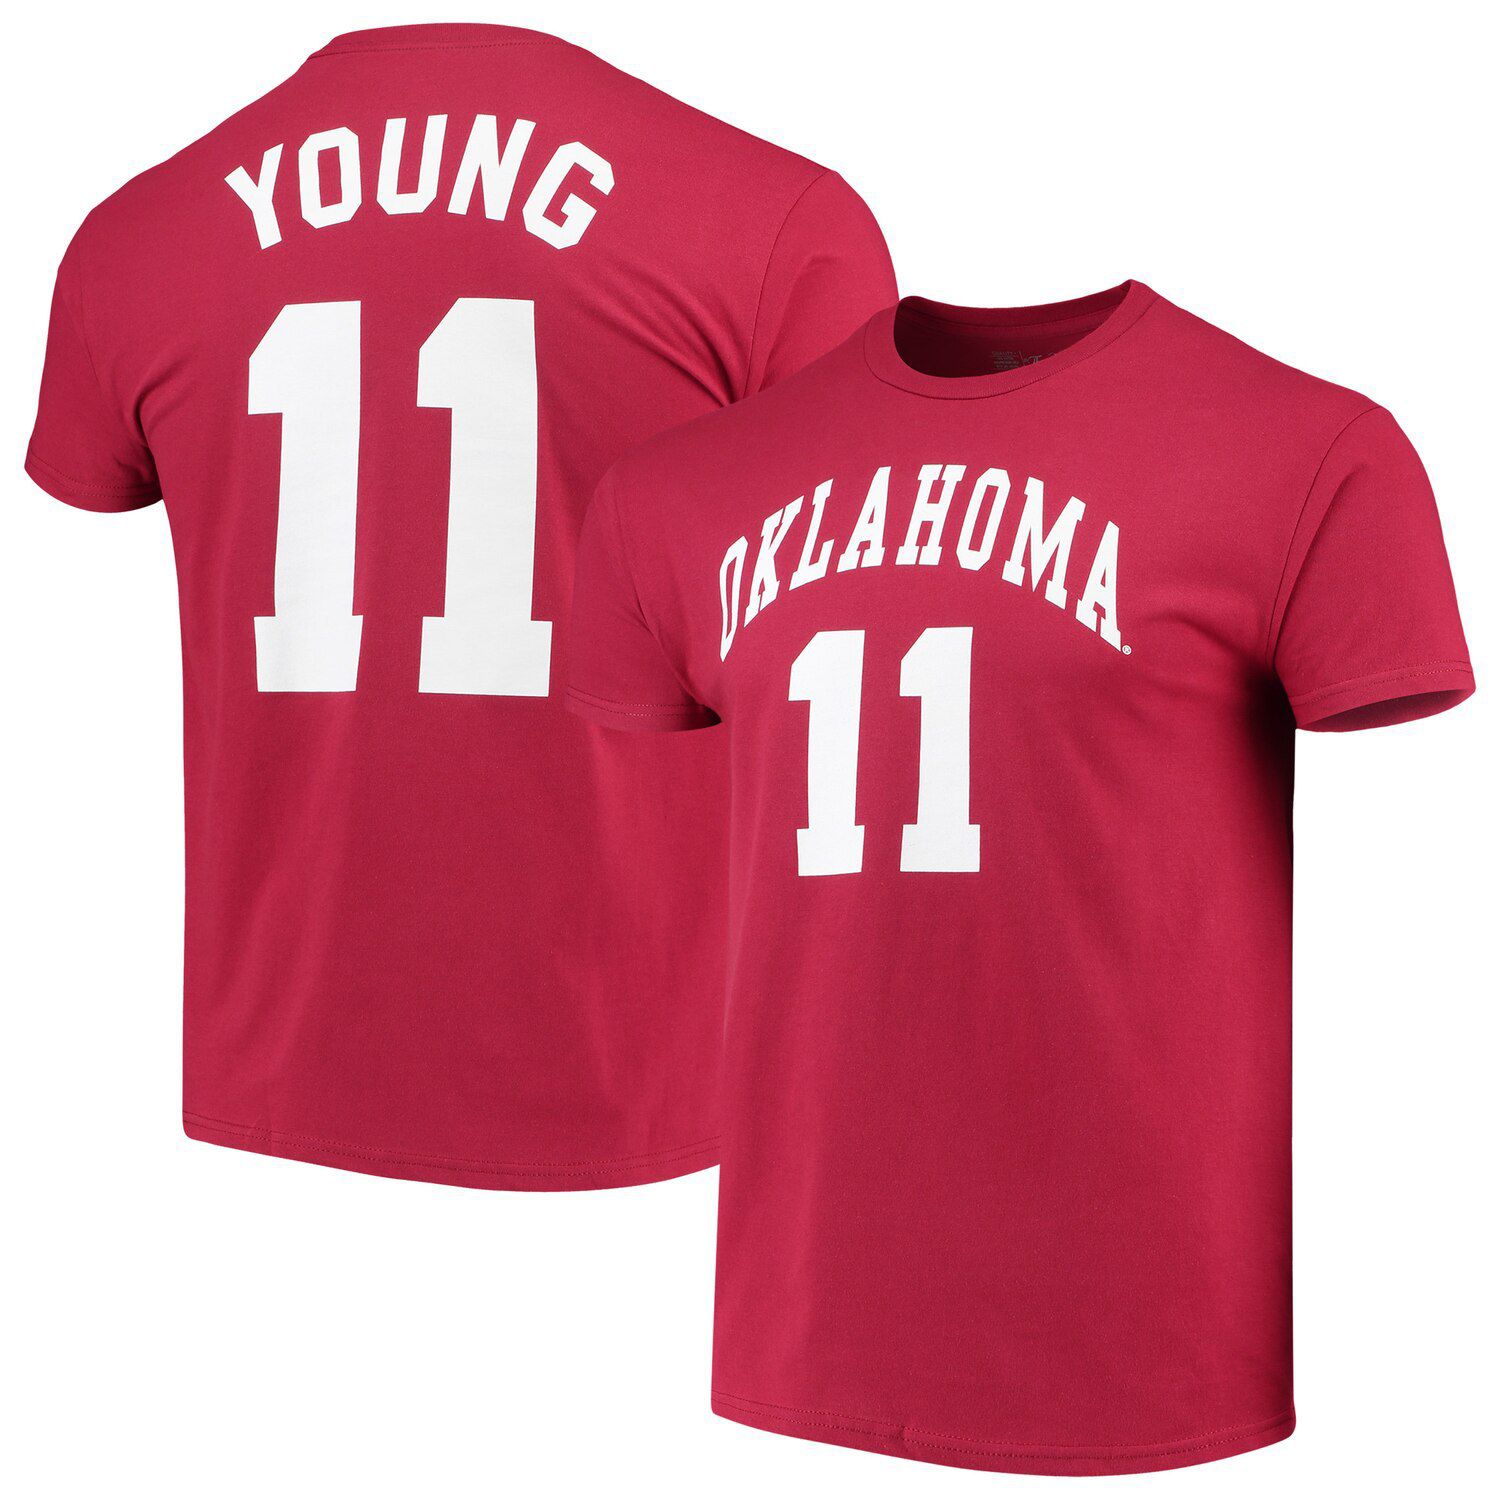 trae young jersey oklahoma